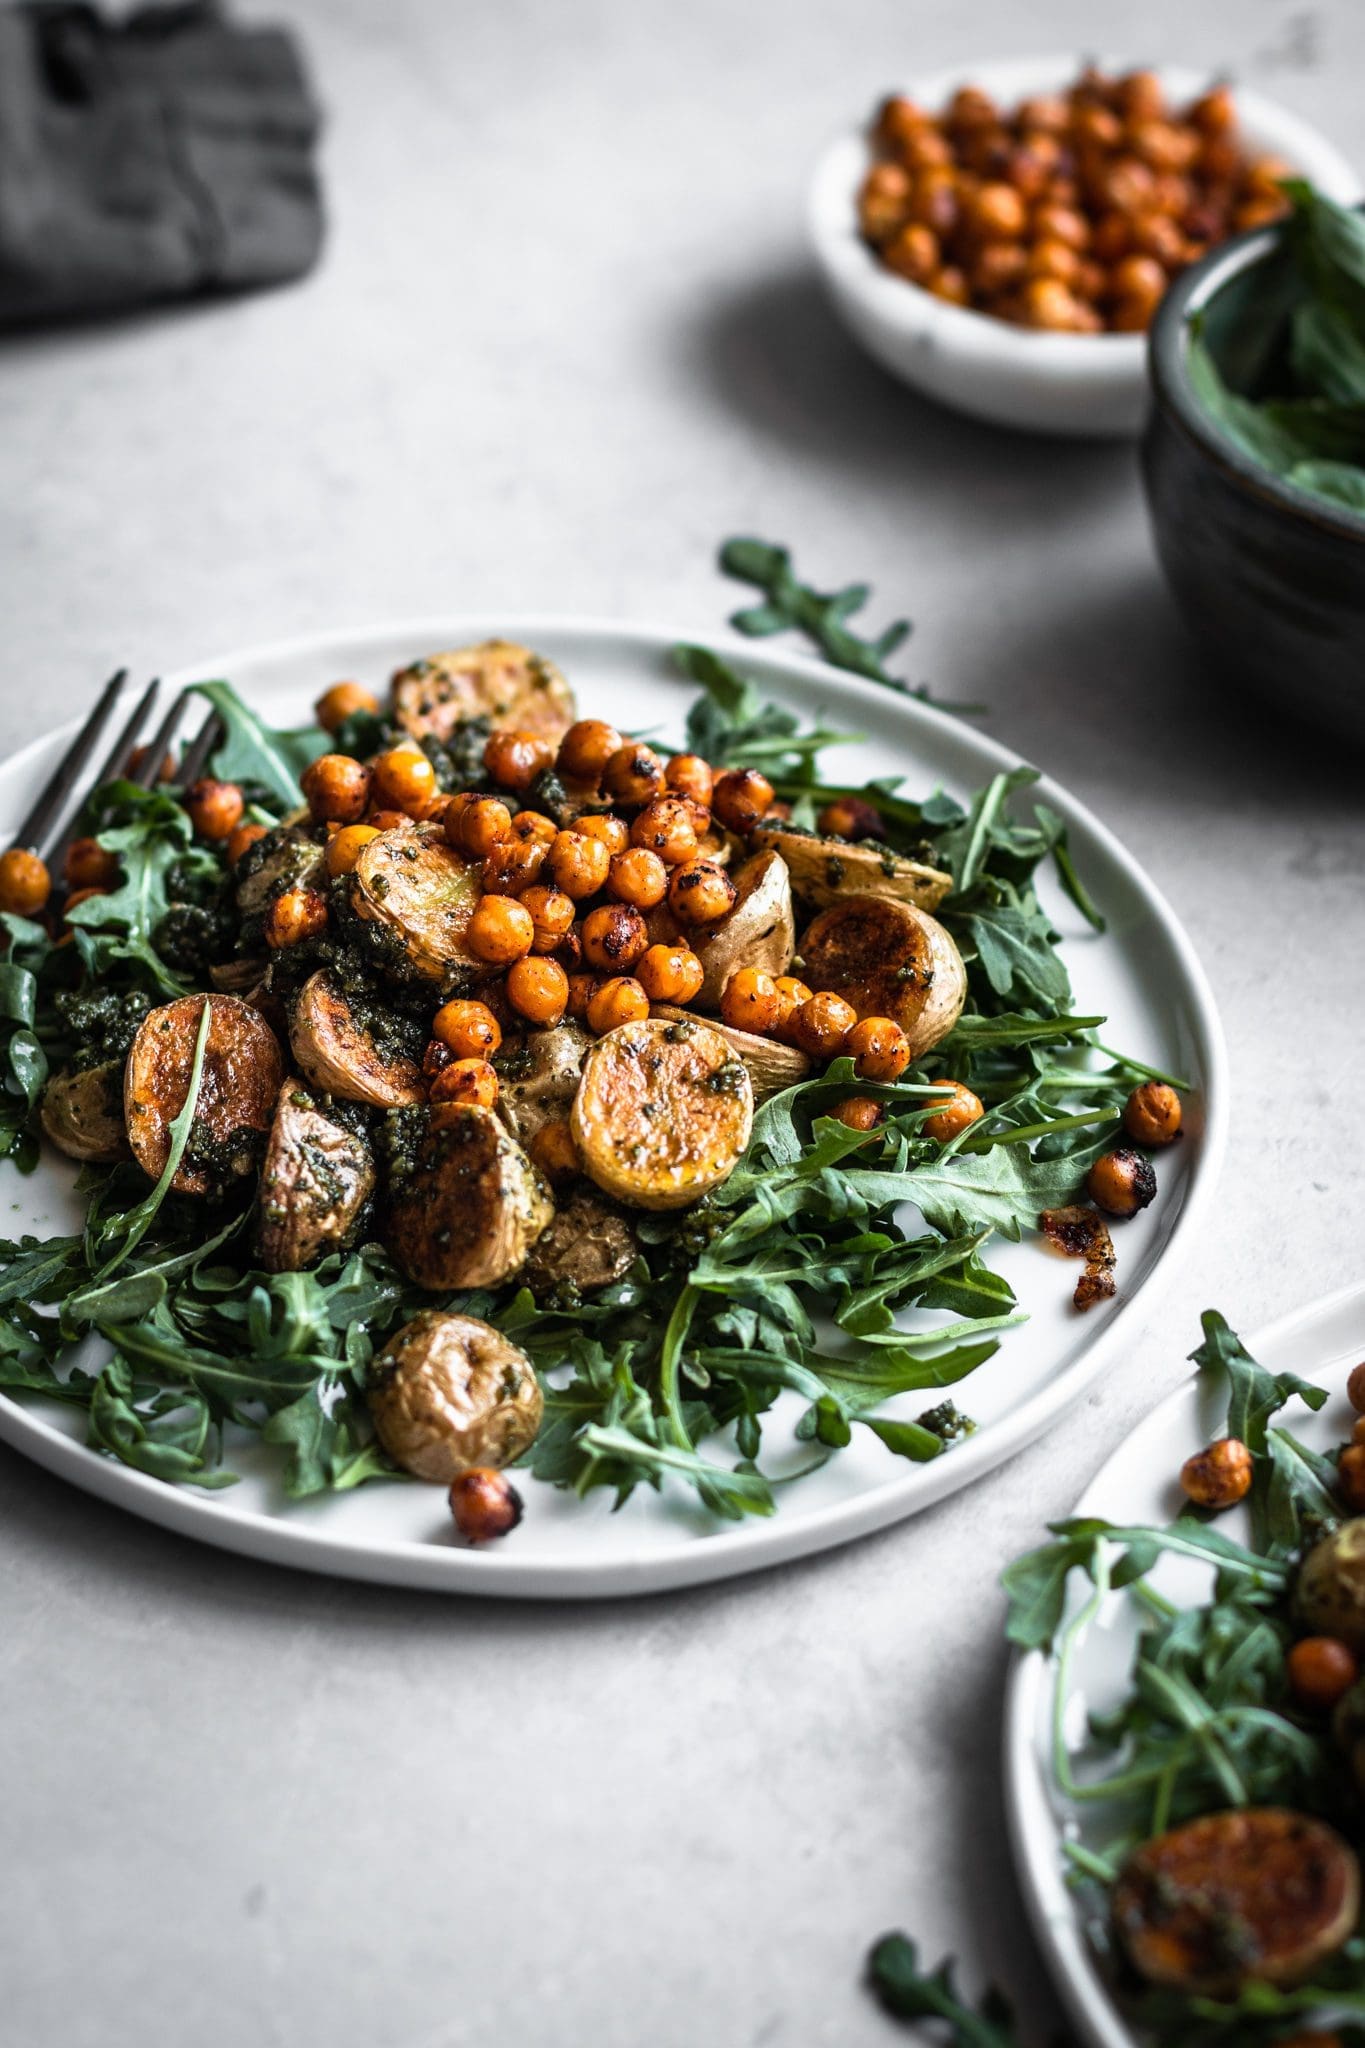 Roasted Potato Pesto Salad with Spicy Chipotle Chickpeas